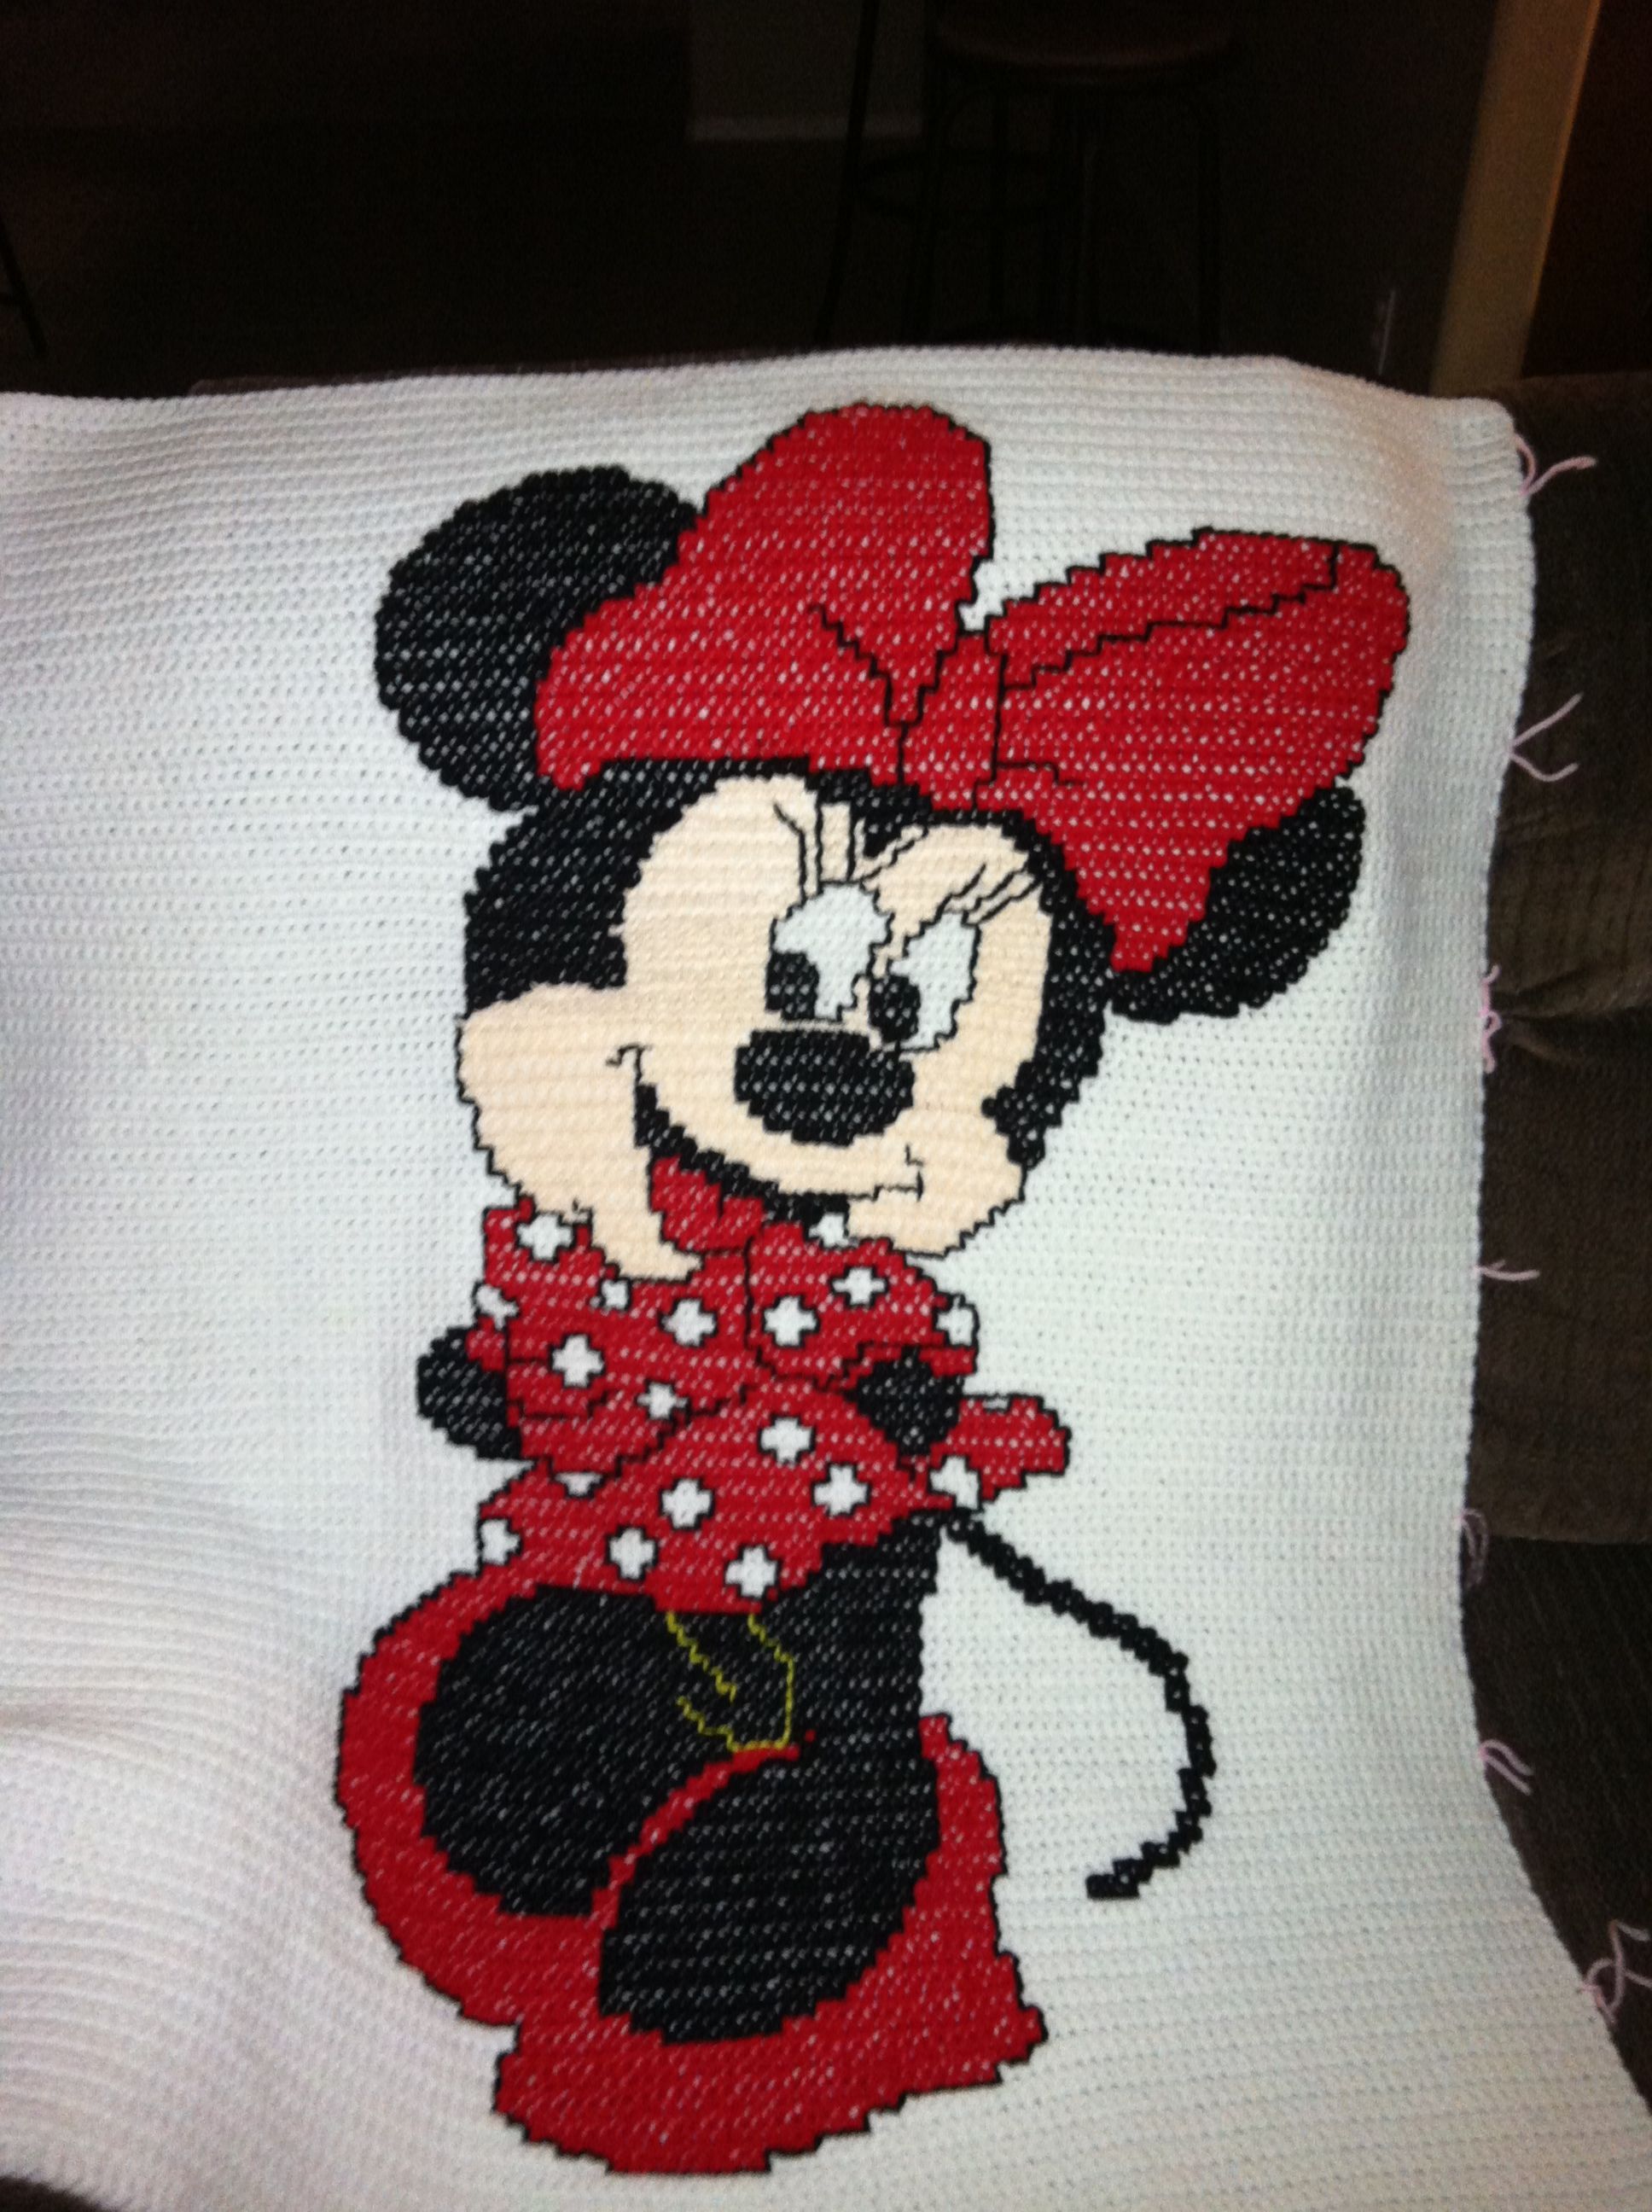 Free Crochet Pattern For Minnie Mouse Afghan : minnie mouse crochet